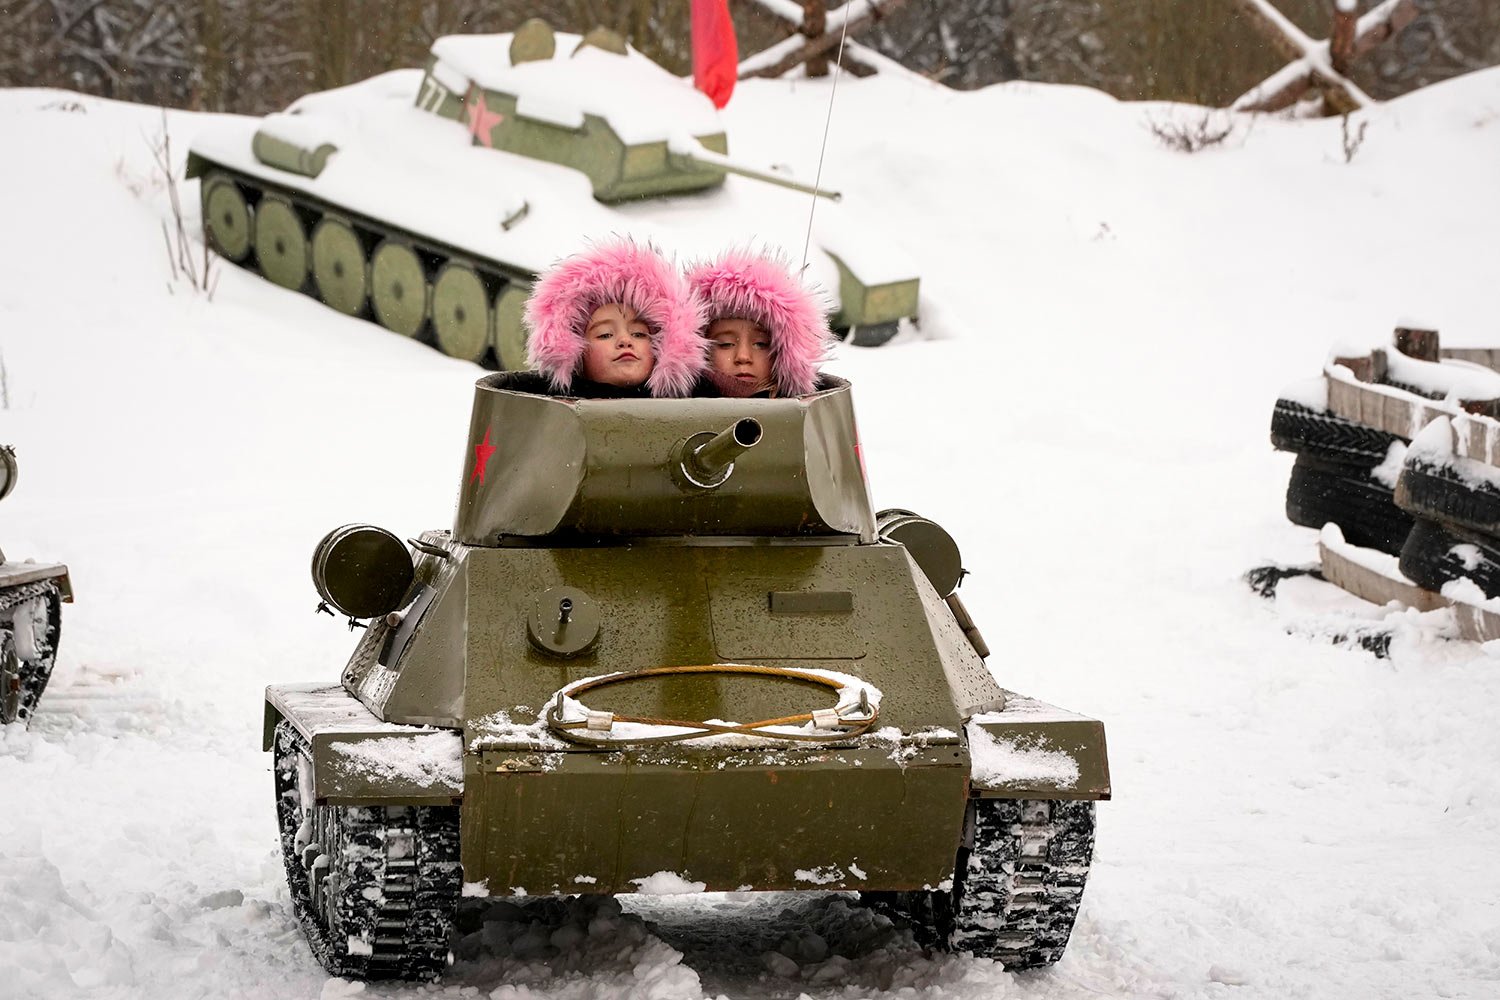  Children ride a model of World War II-era Soviet T-34 tank during a military historical festival at the family historical tank park outside St. Petersburg, Russia, Saturday, Feb. 4, 2023. (AP Photo/Dmitri Lovetsky) 